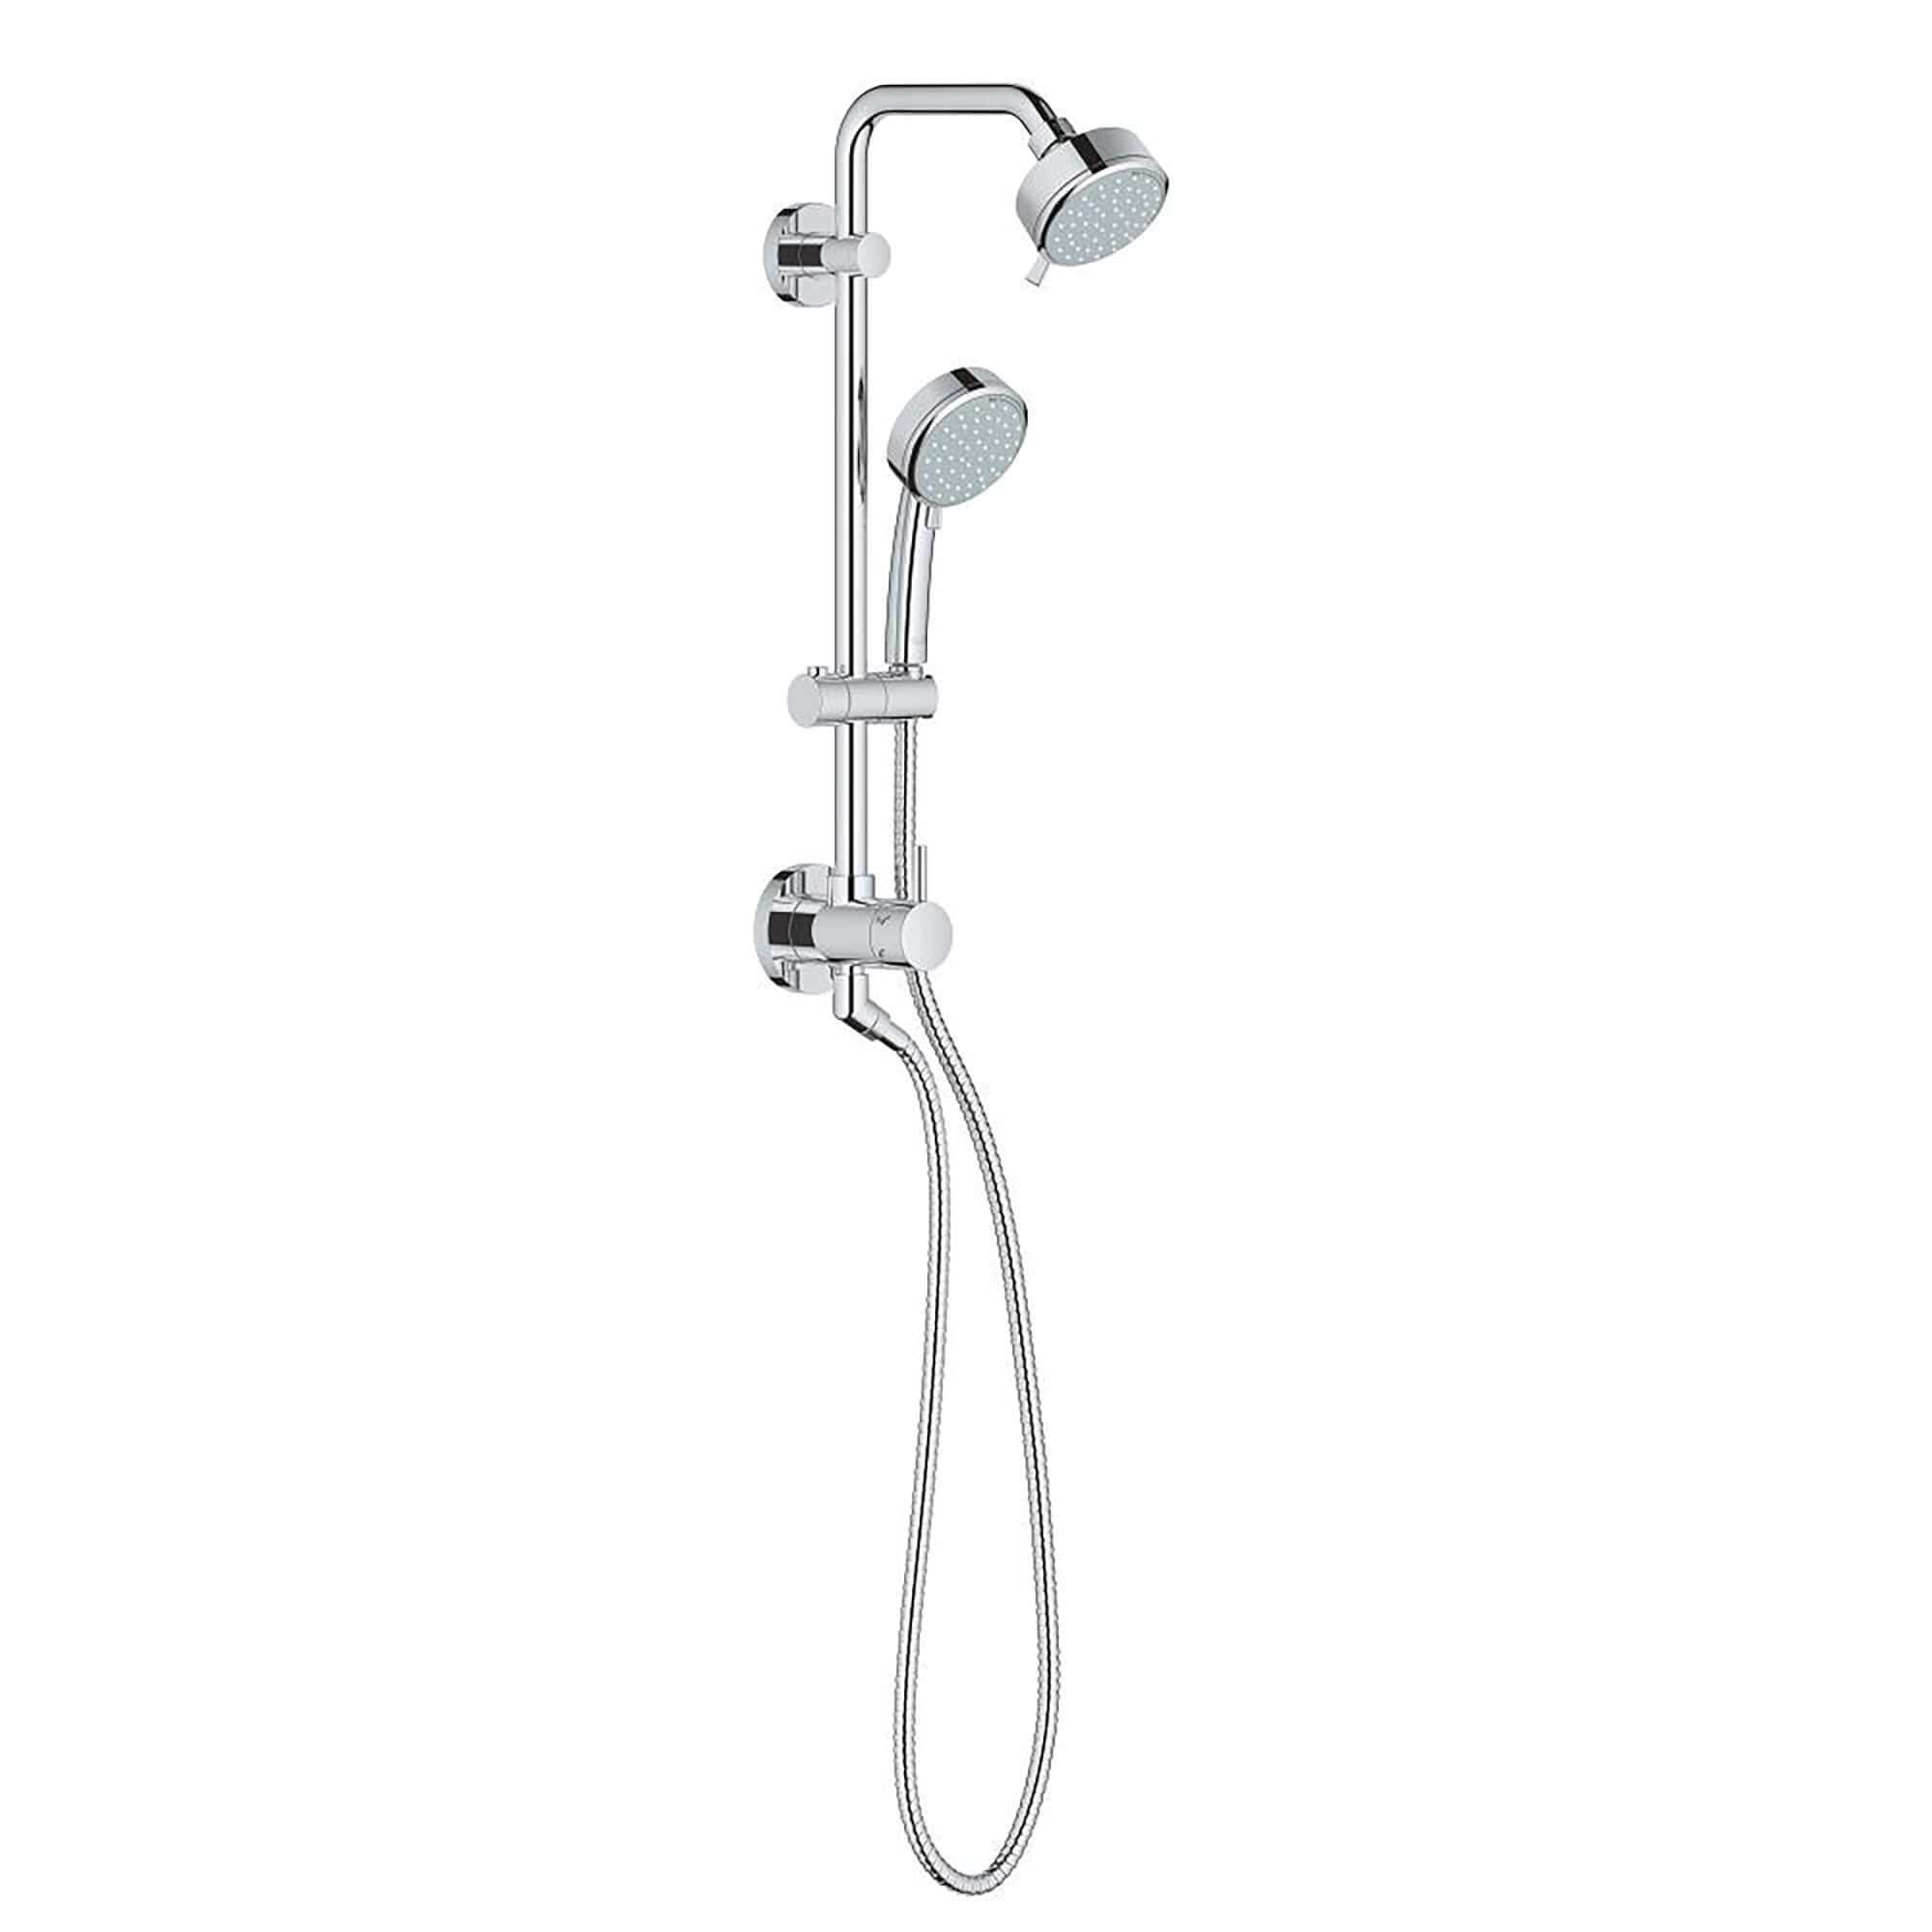 18 In Retro Fit Shower System with Standard Shower Arm